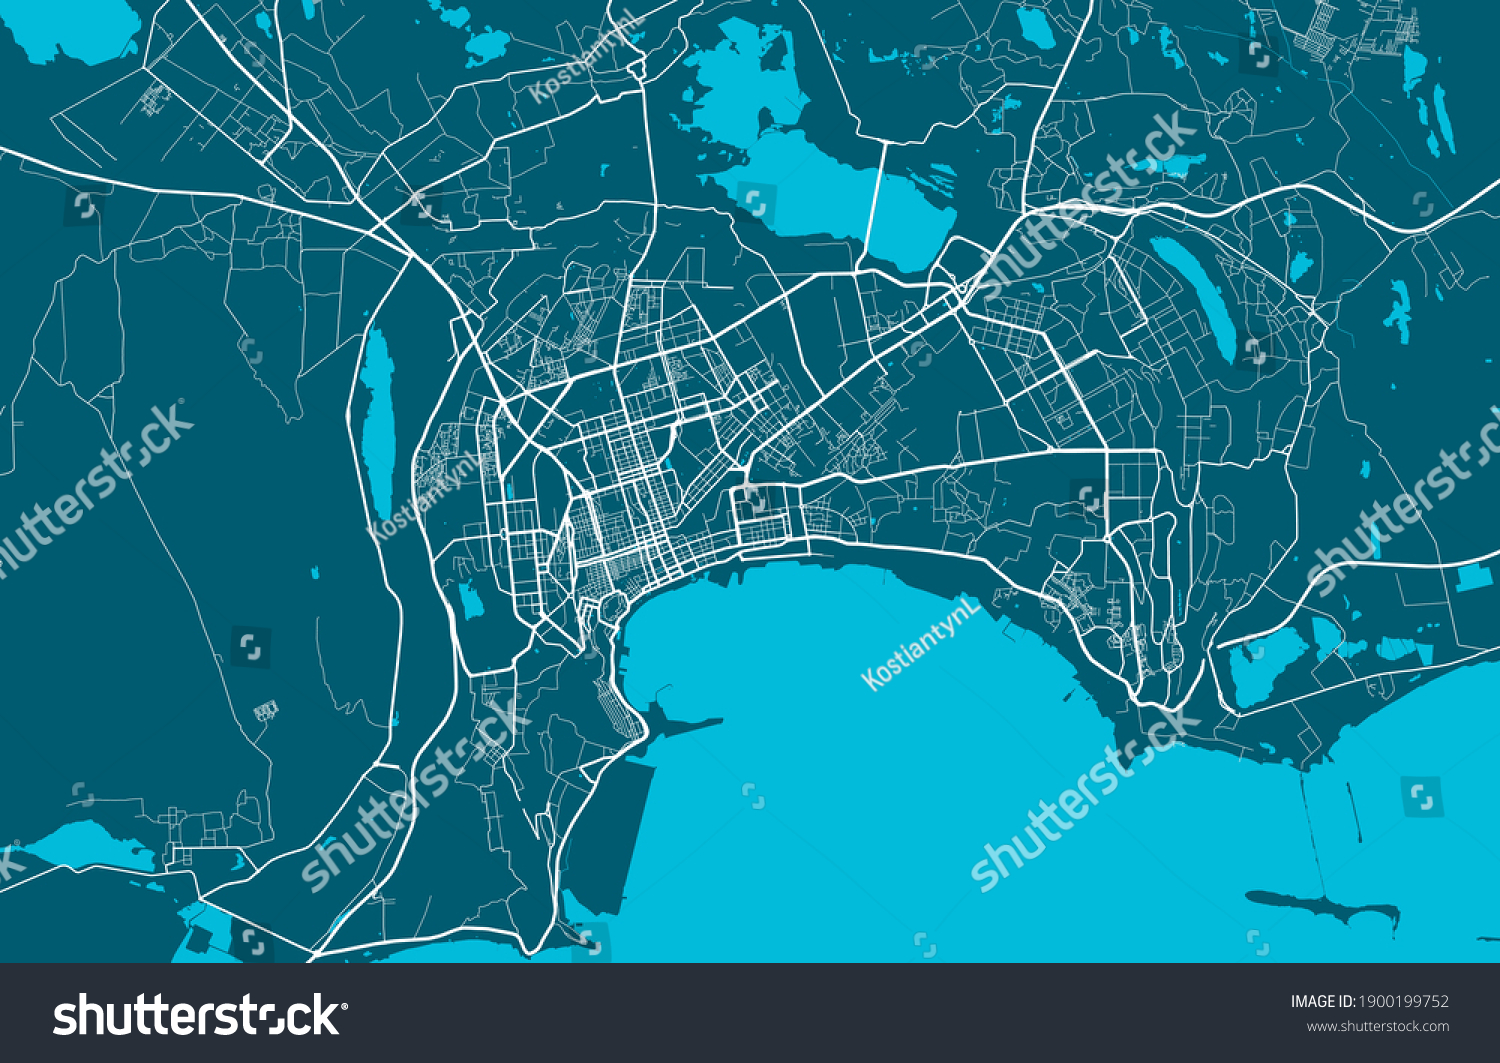 SVG of Detailed map of Baku city administrative area. Royalty free vector illustration. Cityscape panorama. Decorative graphic tourist map of Baku territory. svg